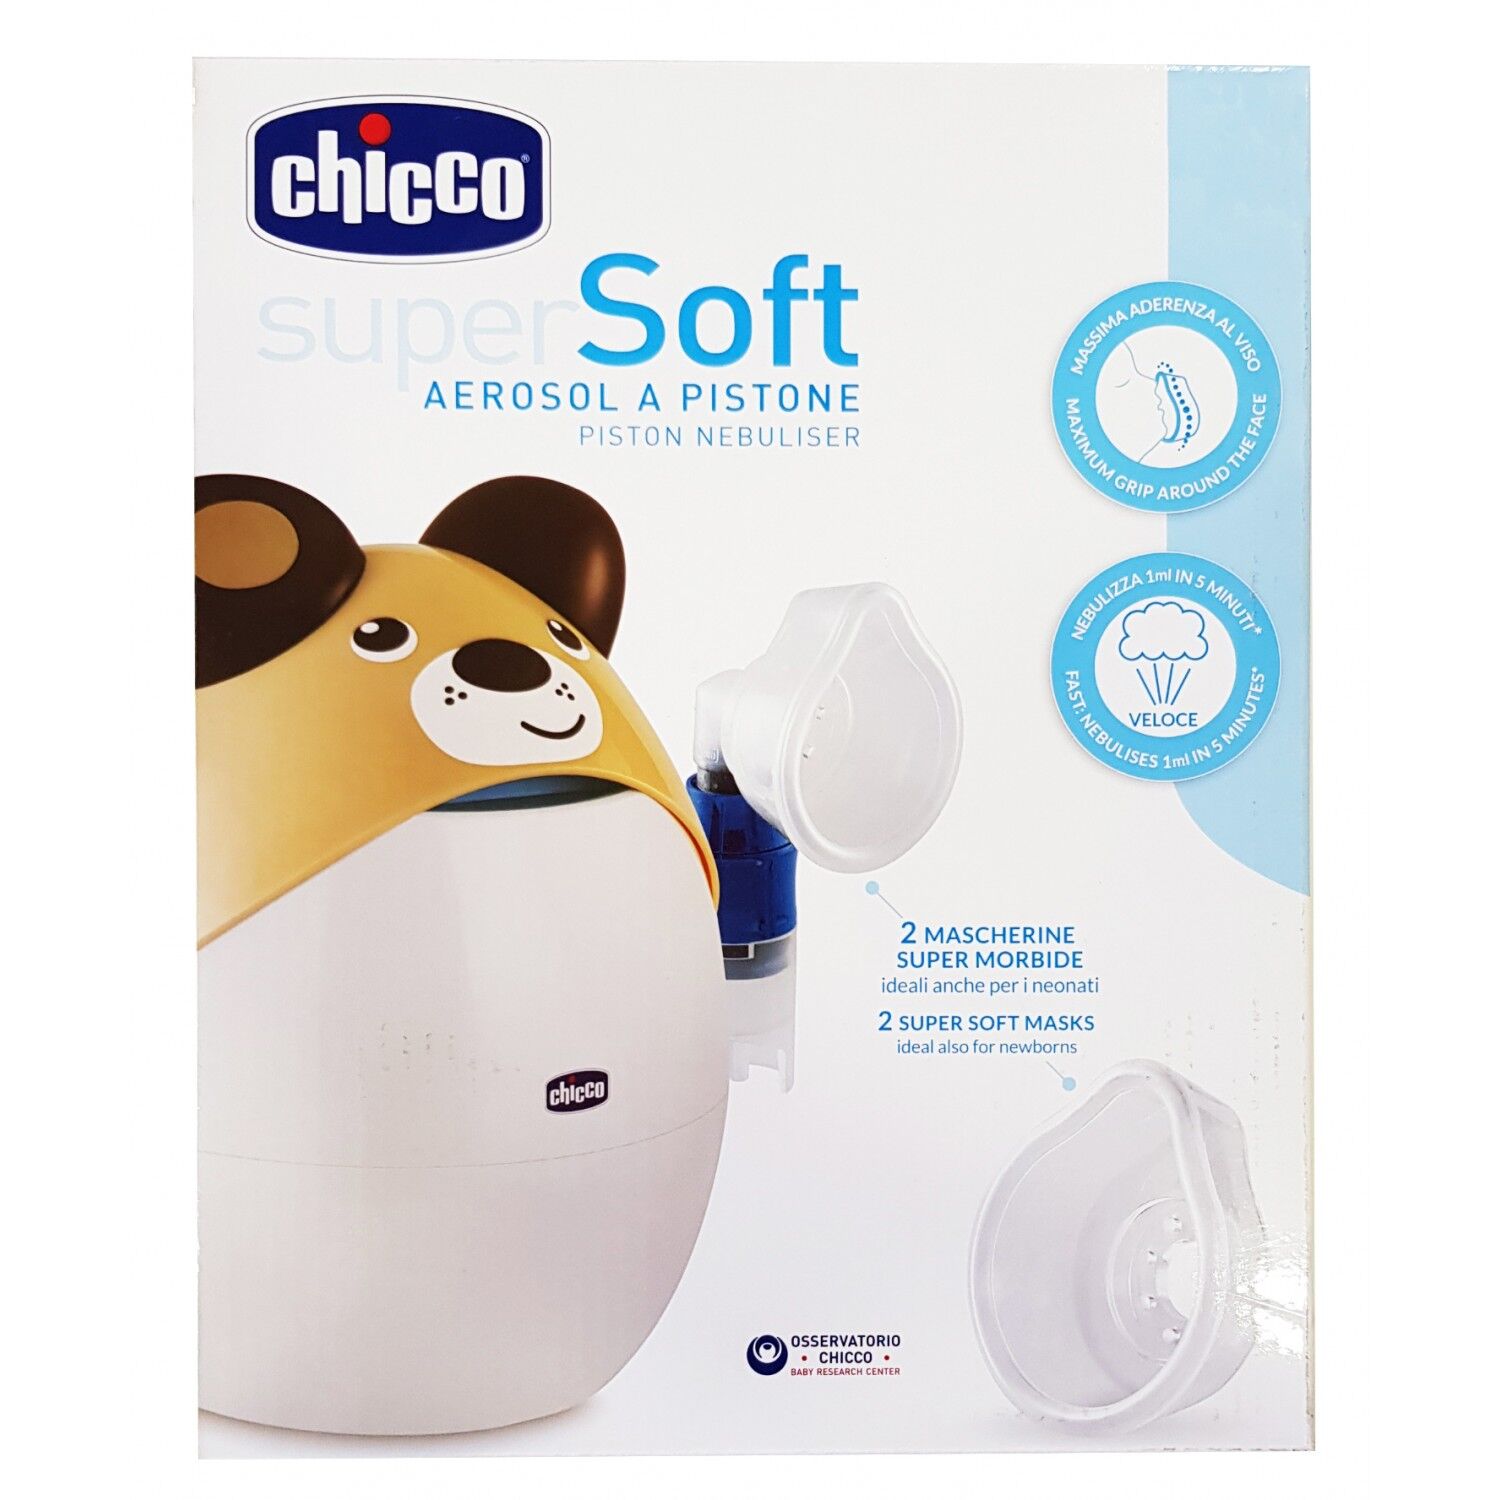 Chicco Aérosol Chicco SuperSoft Cane Piston